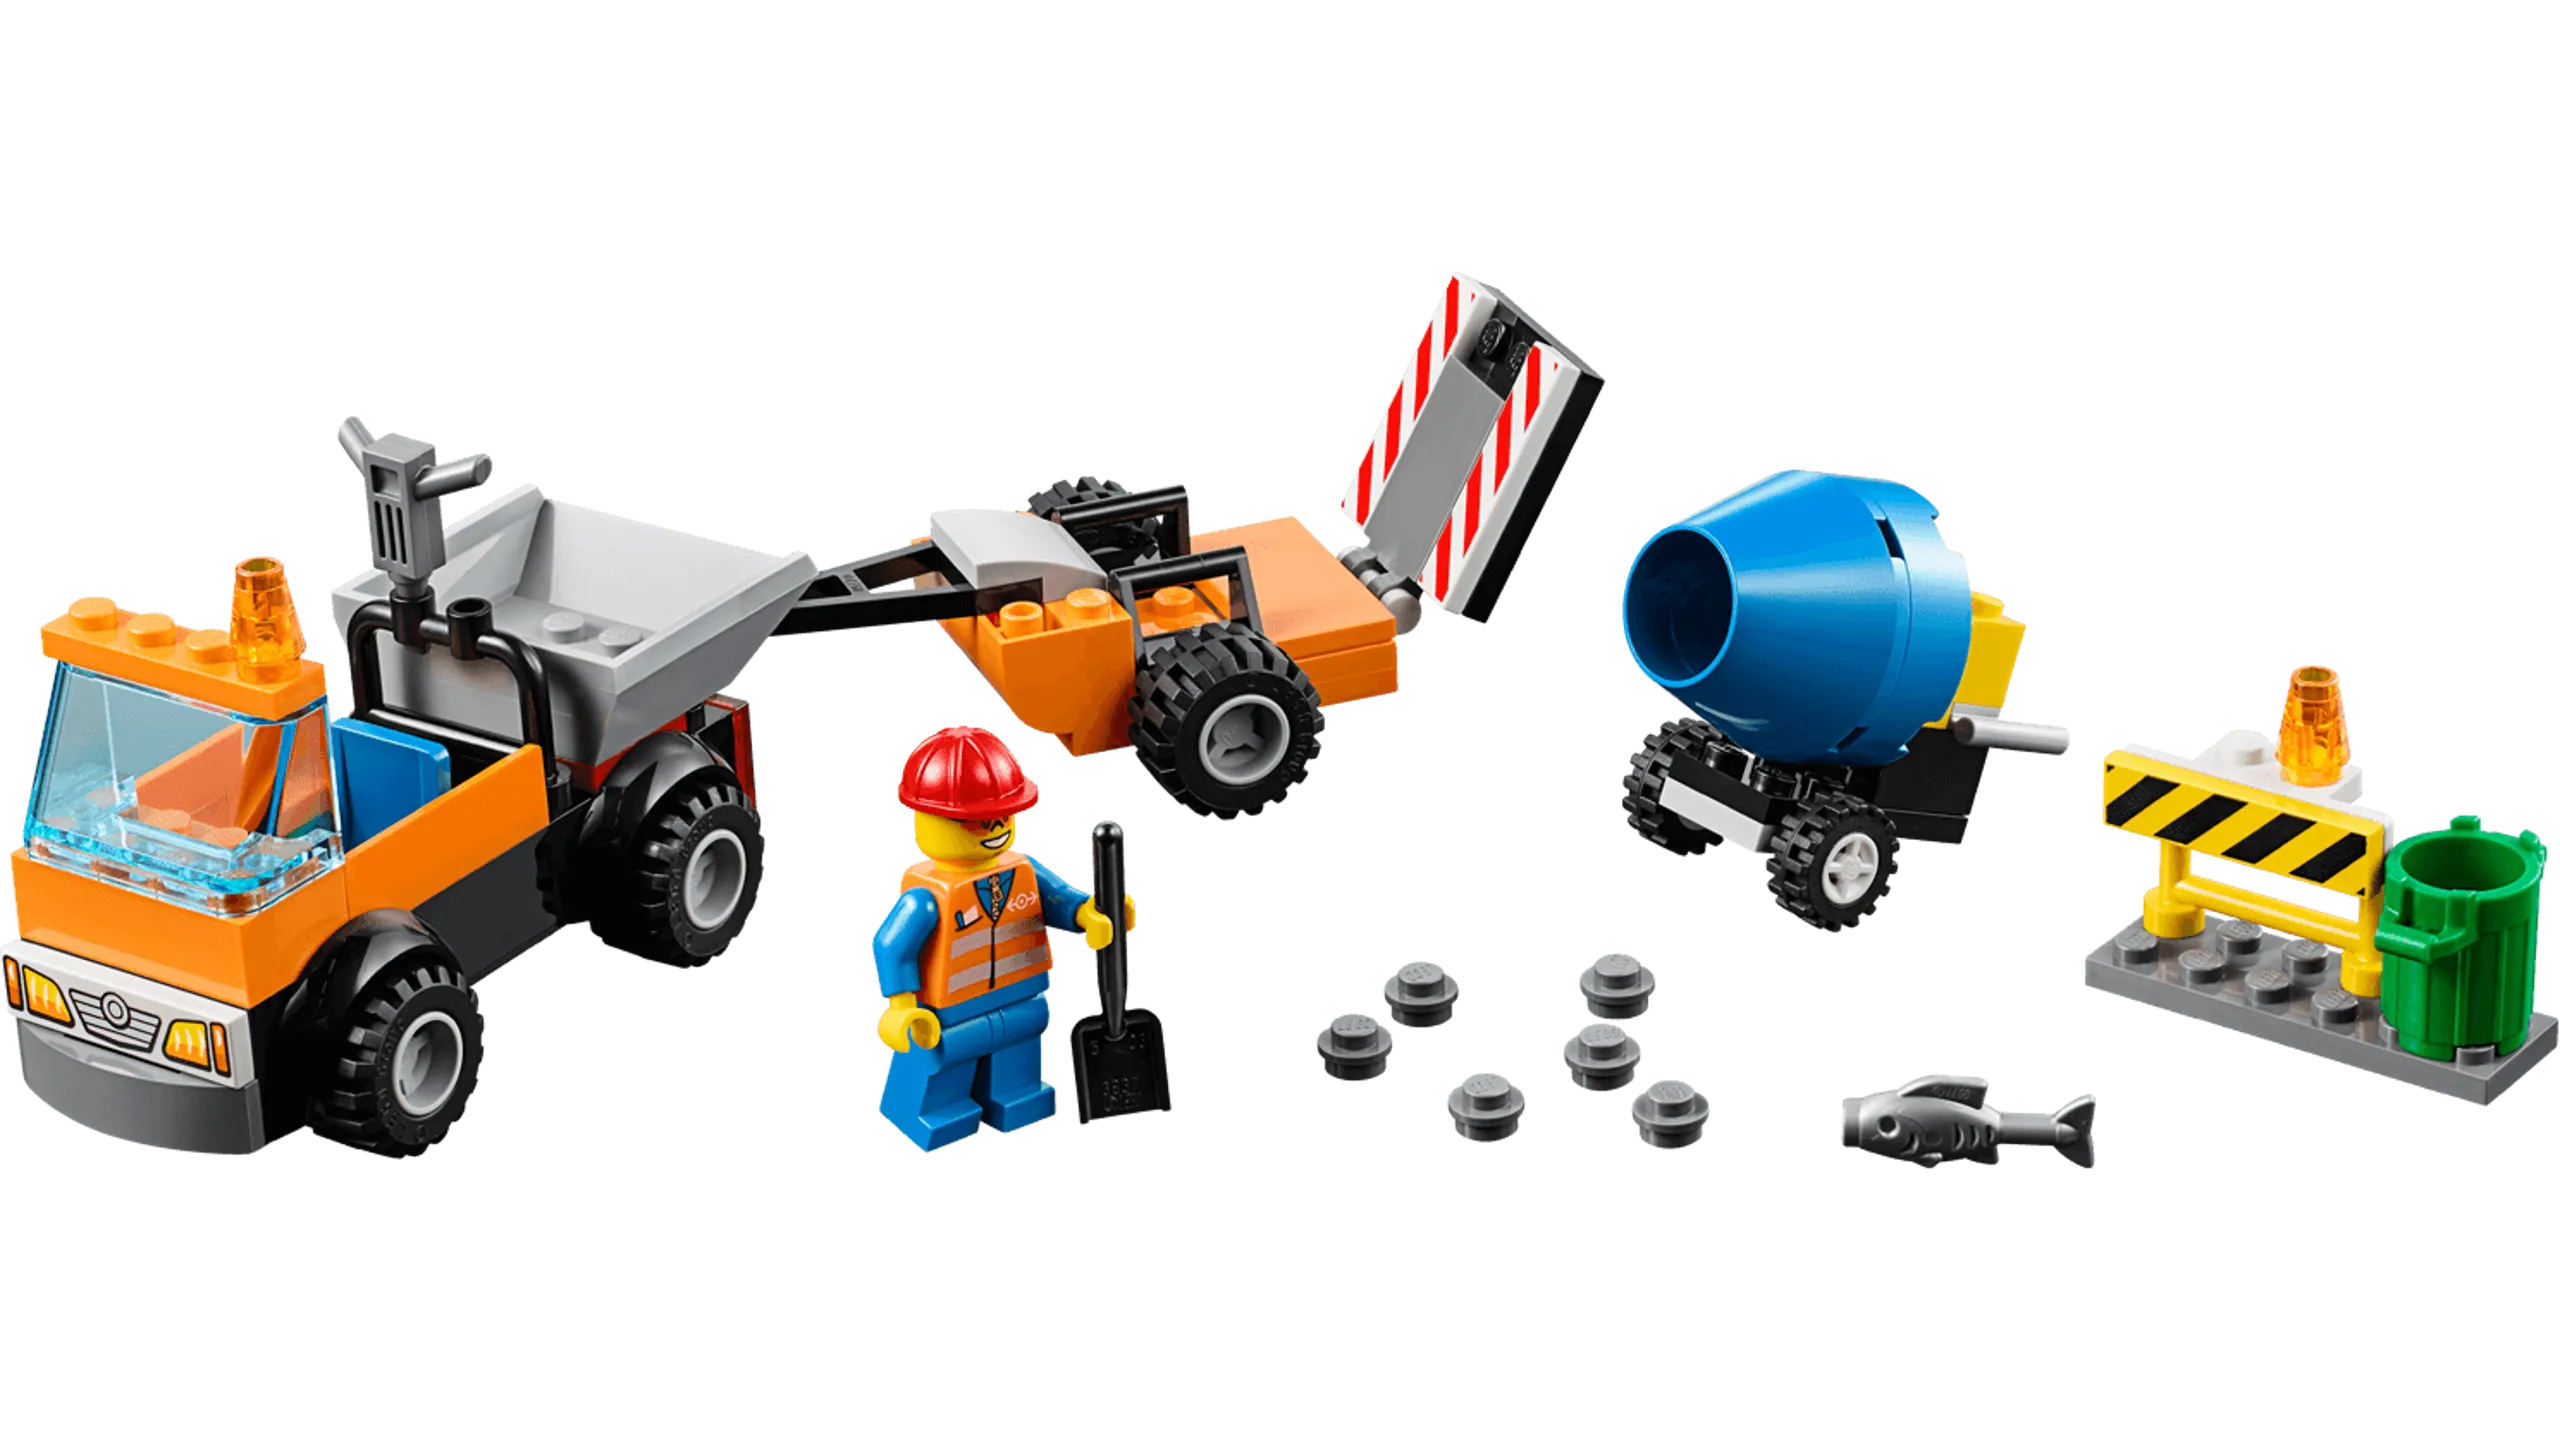 LEGO Juniors Road Repair Truck - 10750 Drive the truck into position and unload the cement mixer. Set up the barrier to stop the traffic and then pour out the cement to fill the hole